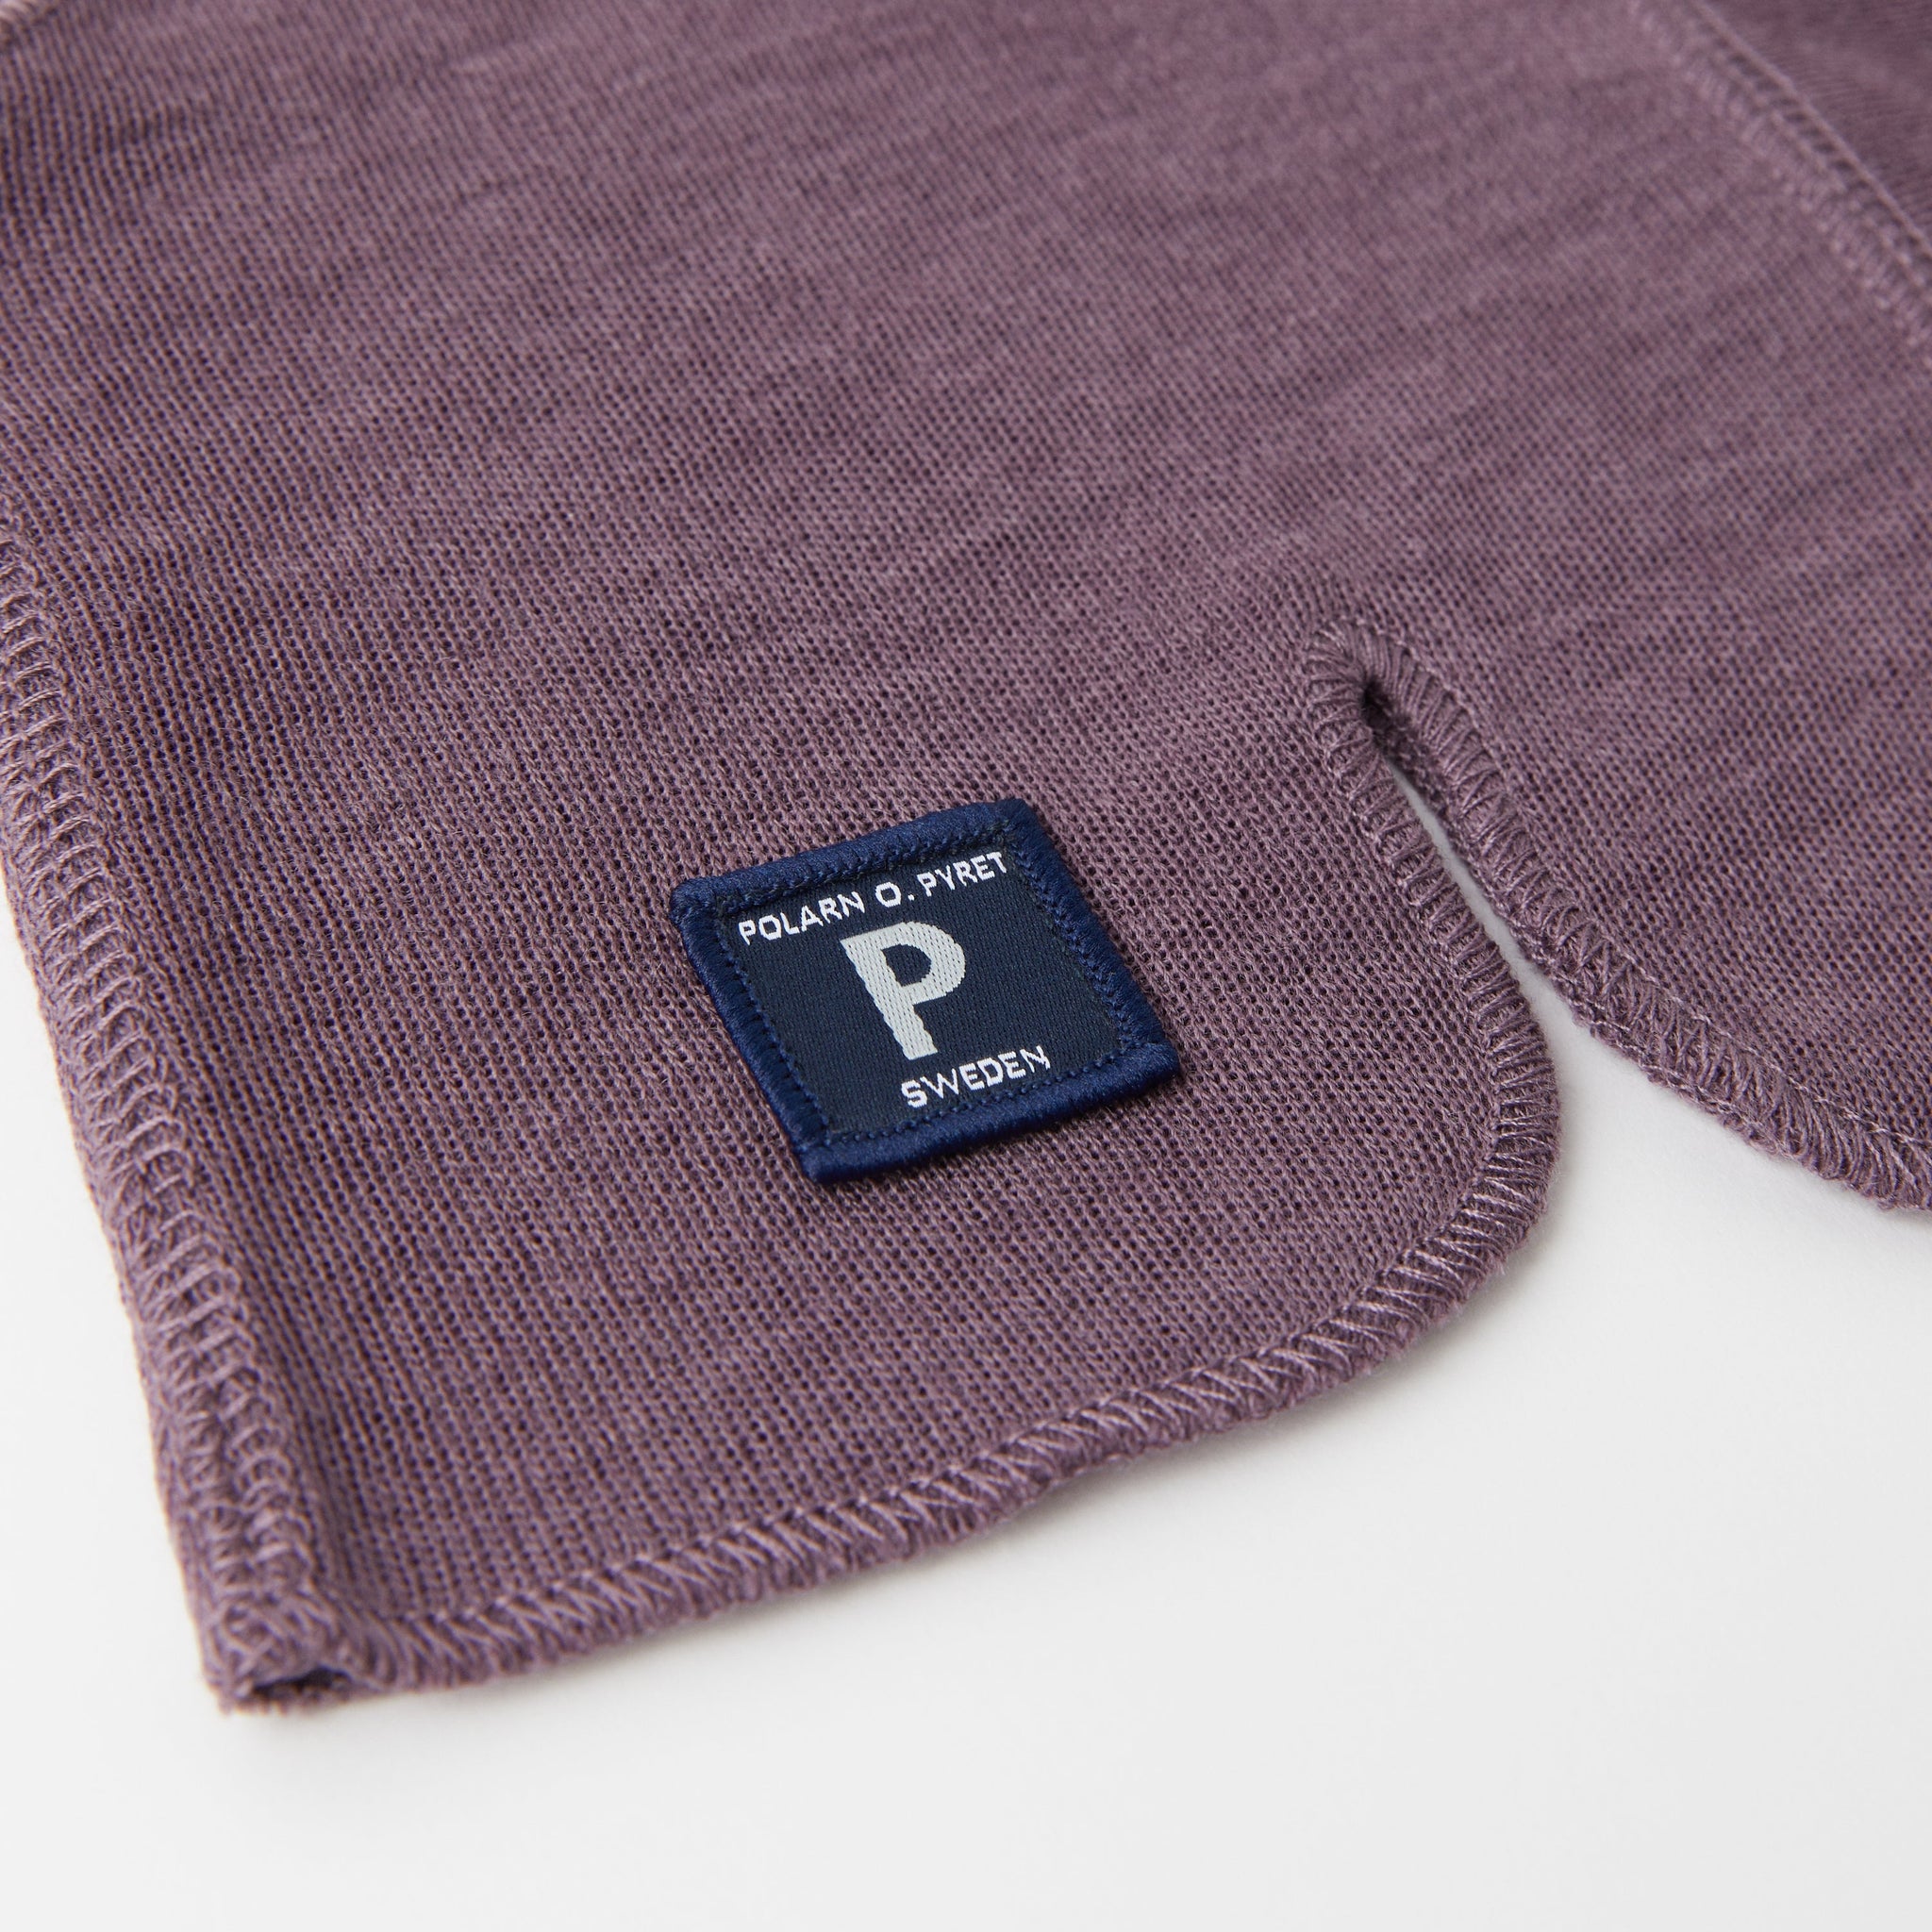 Merino Wool Purple Kids Balaclava from the Polarn O. Pyret kidswear collection. Ethically produced outerwear.